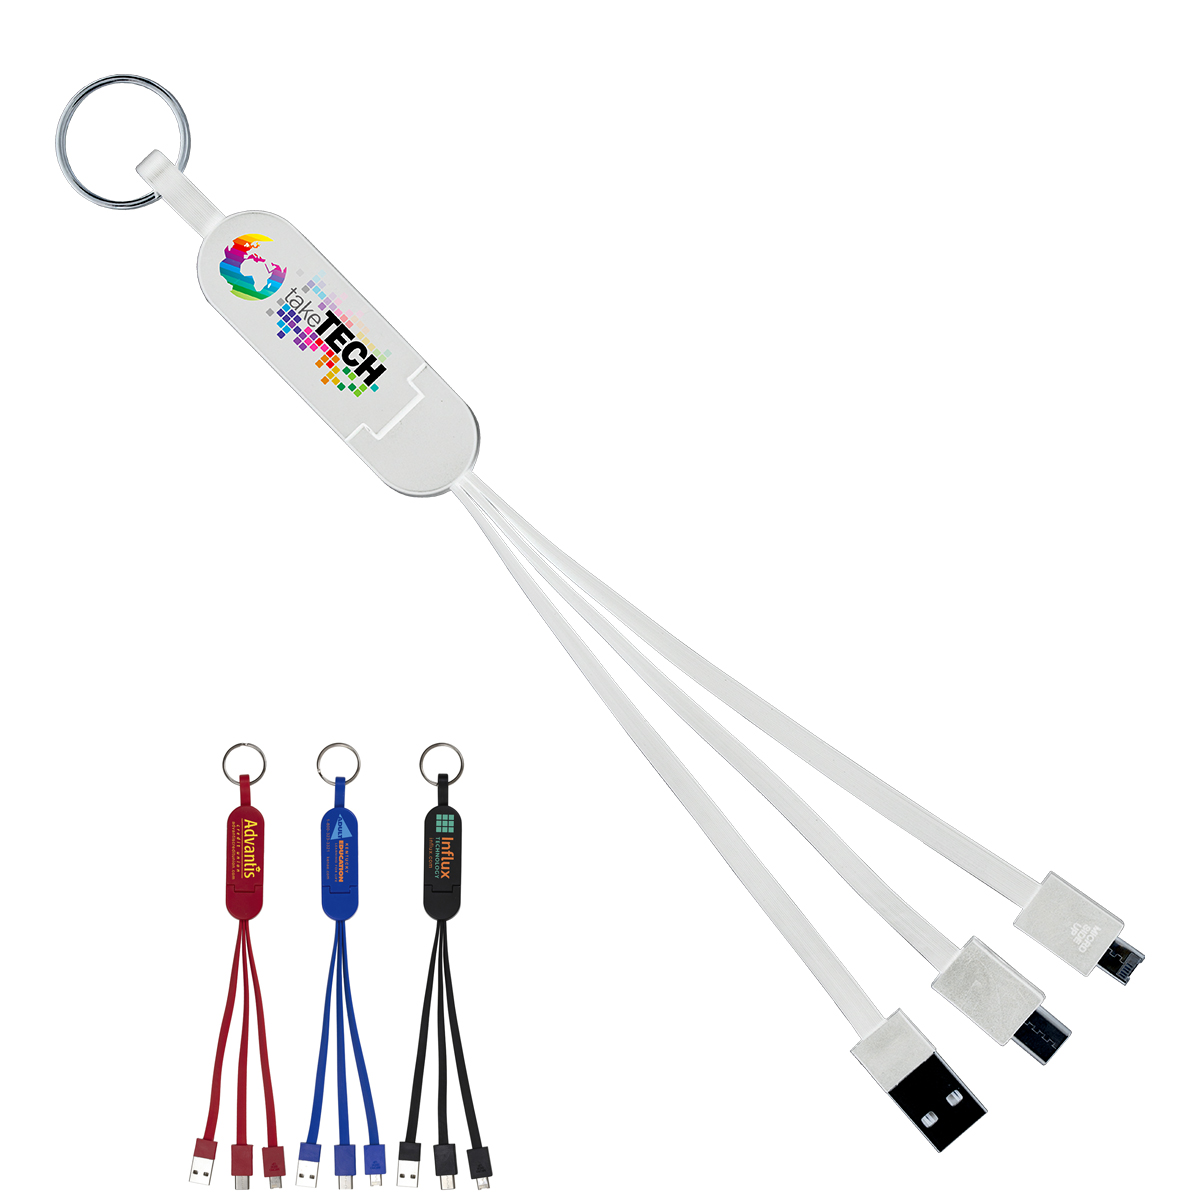 "ESCALANTE" 5-in-1 Cell Phone Charging Cable with Type C Adapter and Phone Stand